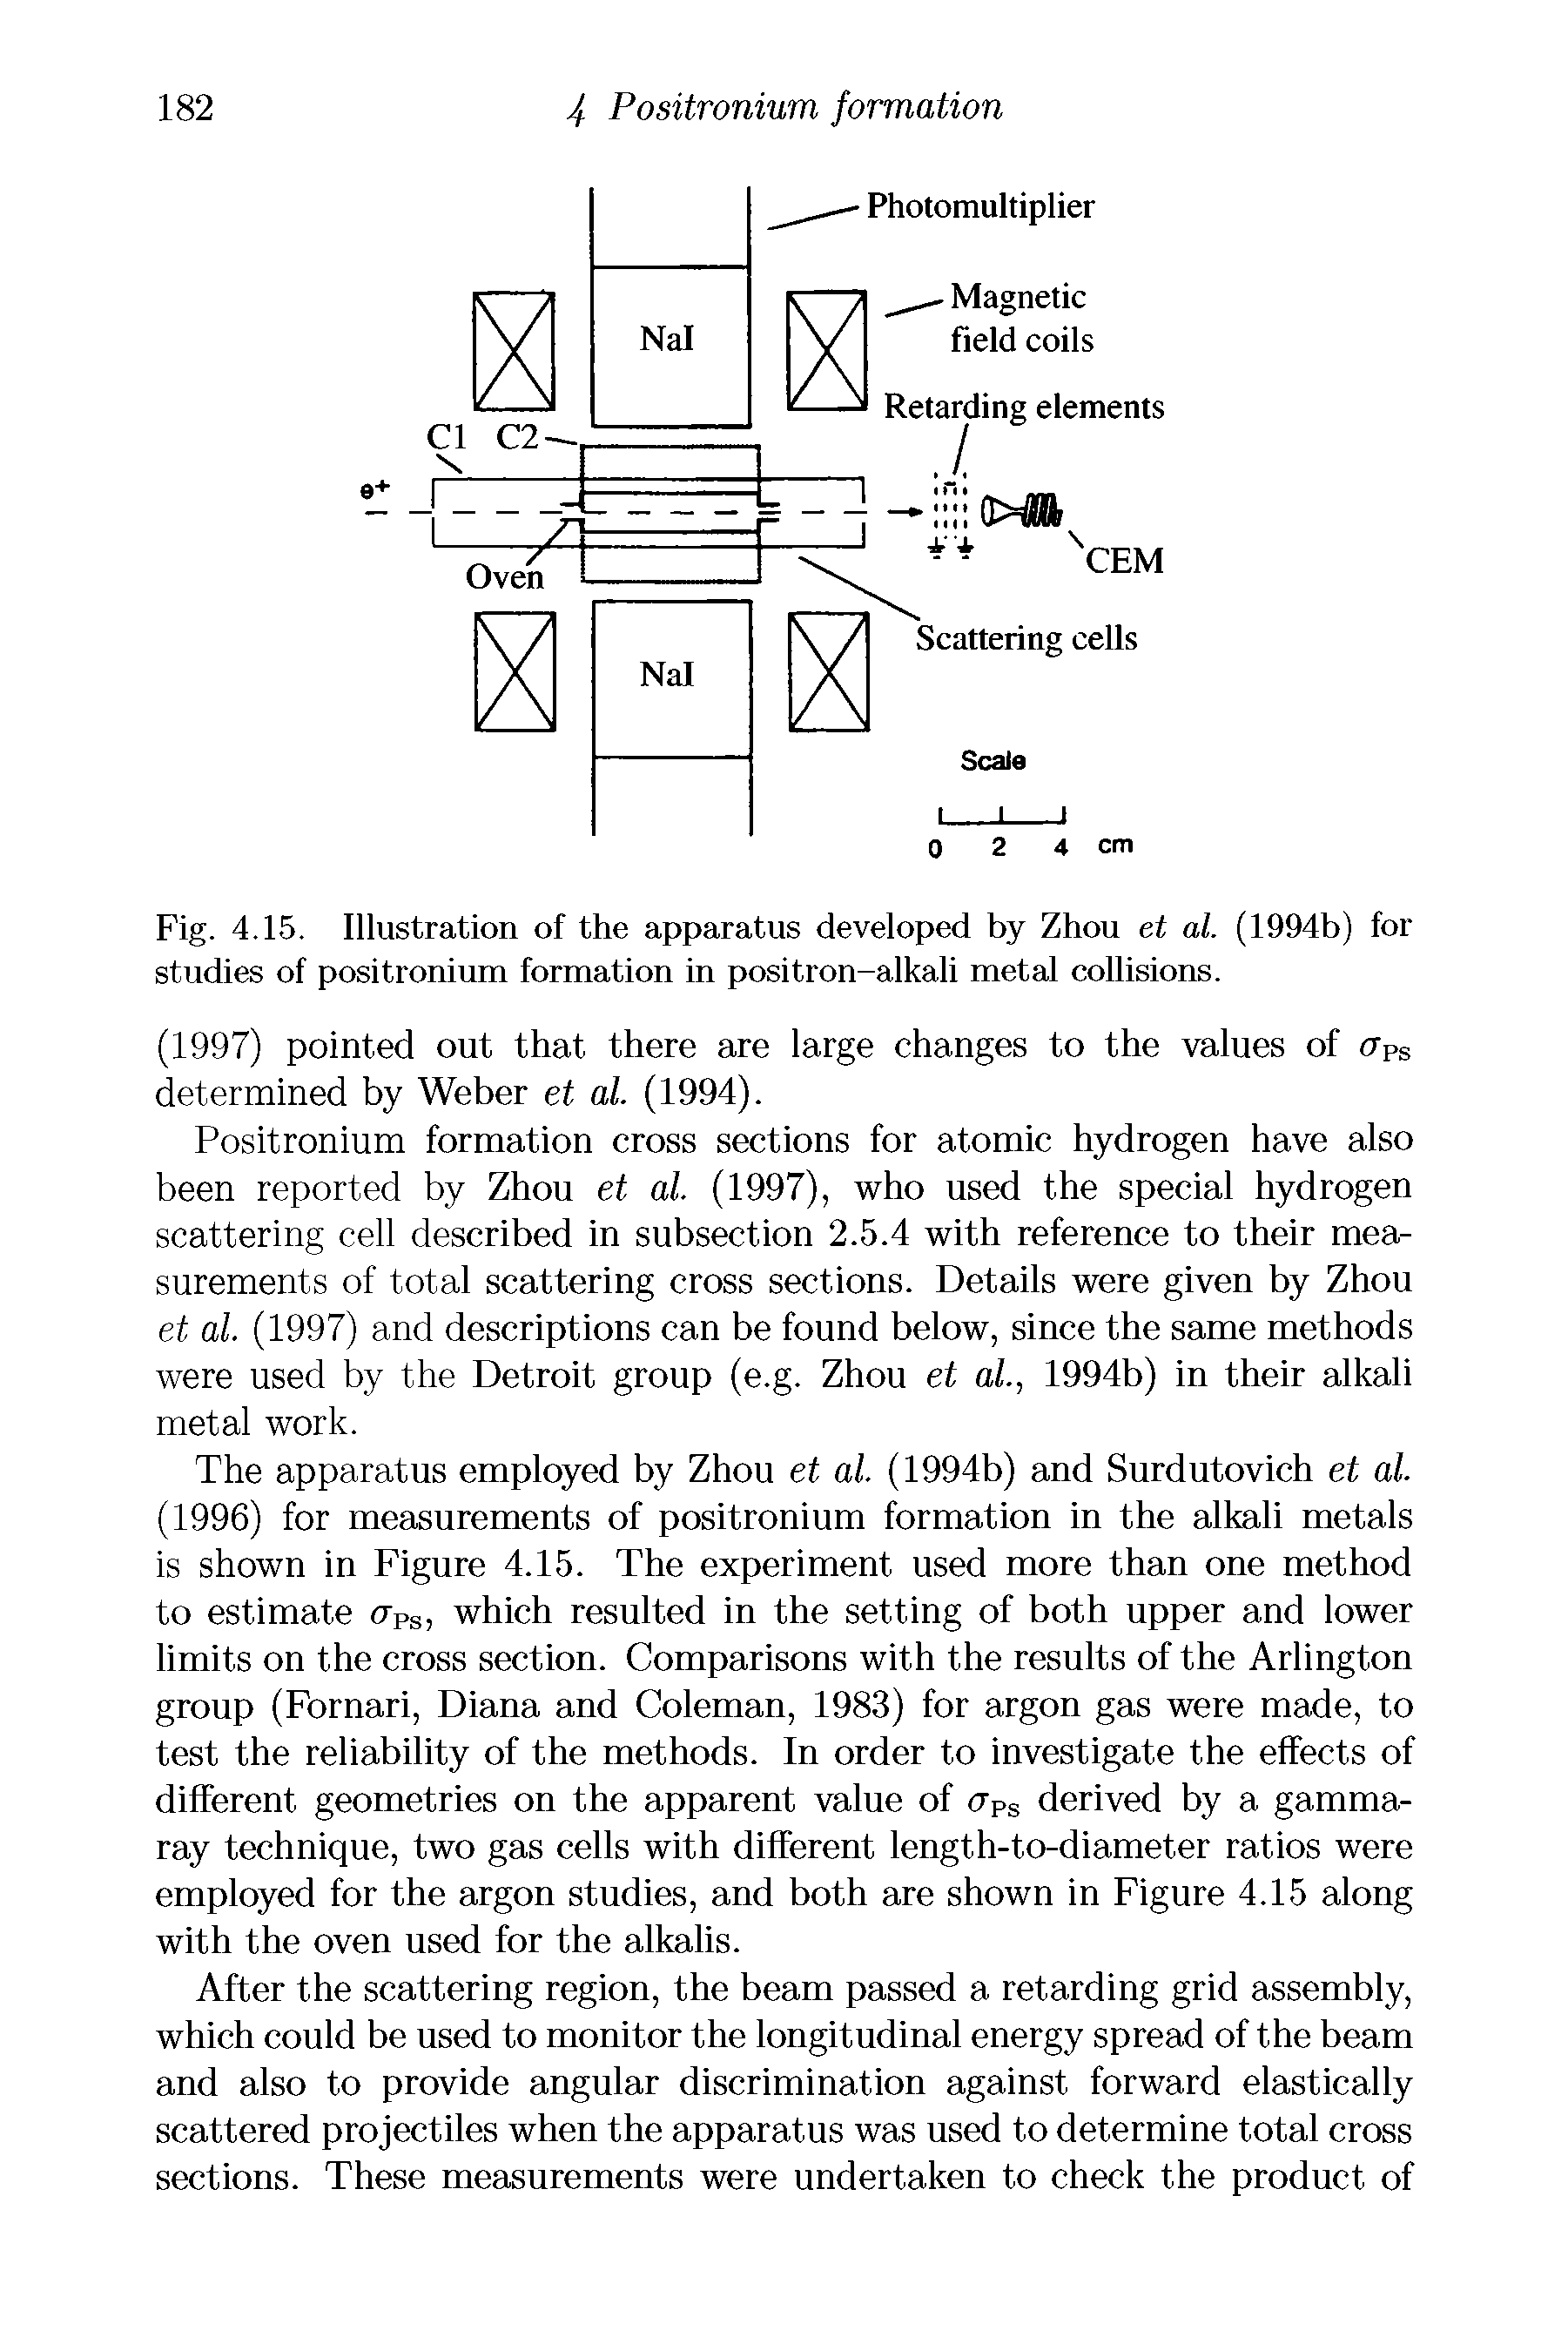 Fig. 4.15. Illustration of the apparatus developed by Zhou et al. (1994b) for studies of positronium formation in positron-alkali metal collisions.